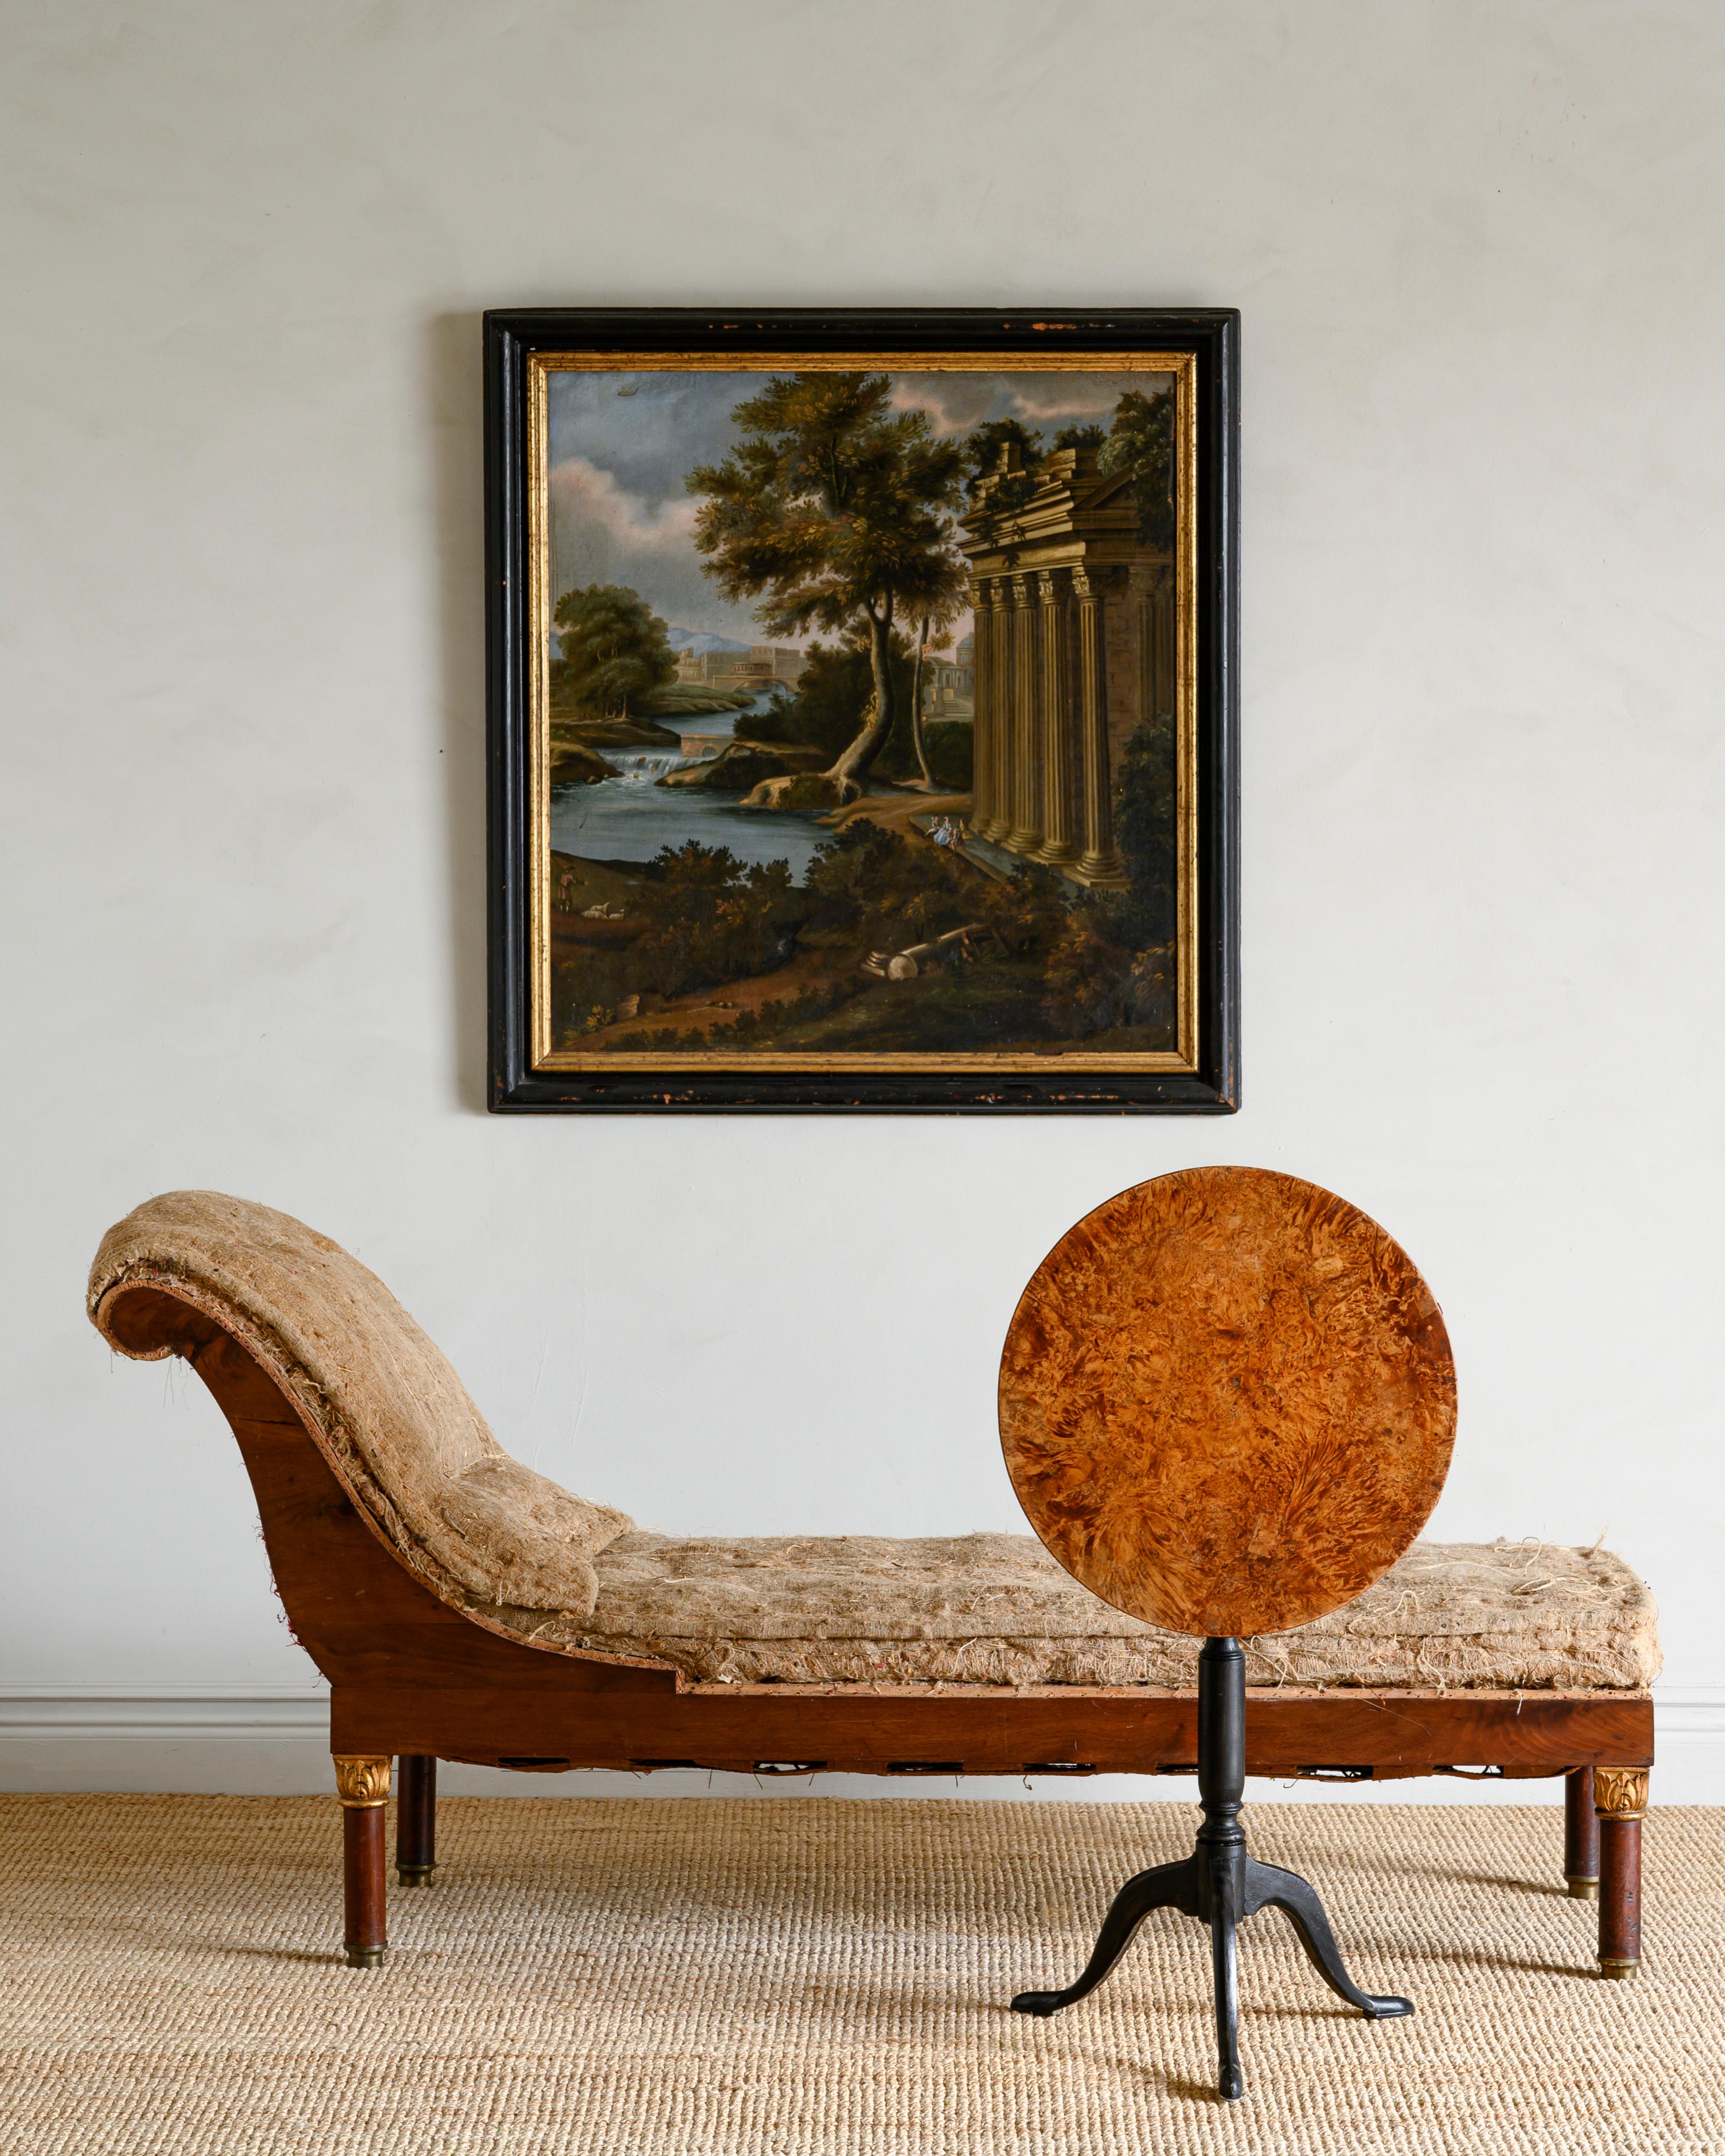 Fine 19th century Swedish mahogany Empire chaise lounge, unupholstered in its original padding, circa 1830. 

Good original condition with wear consistent with age and use. Structurally good and sturdy. A detailed condition report is available on